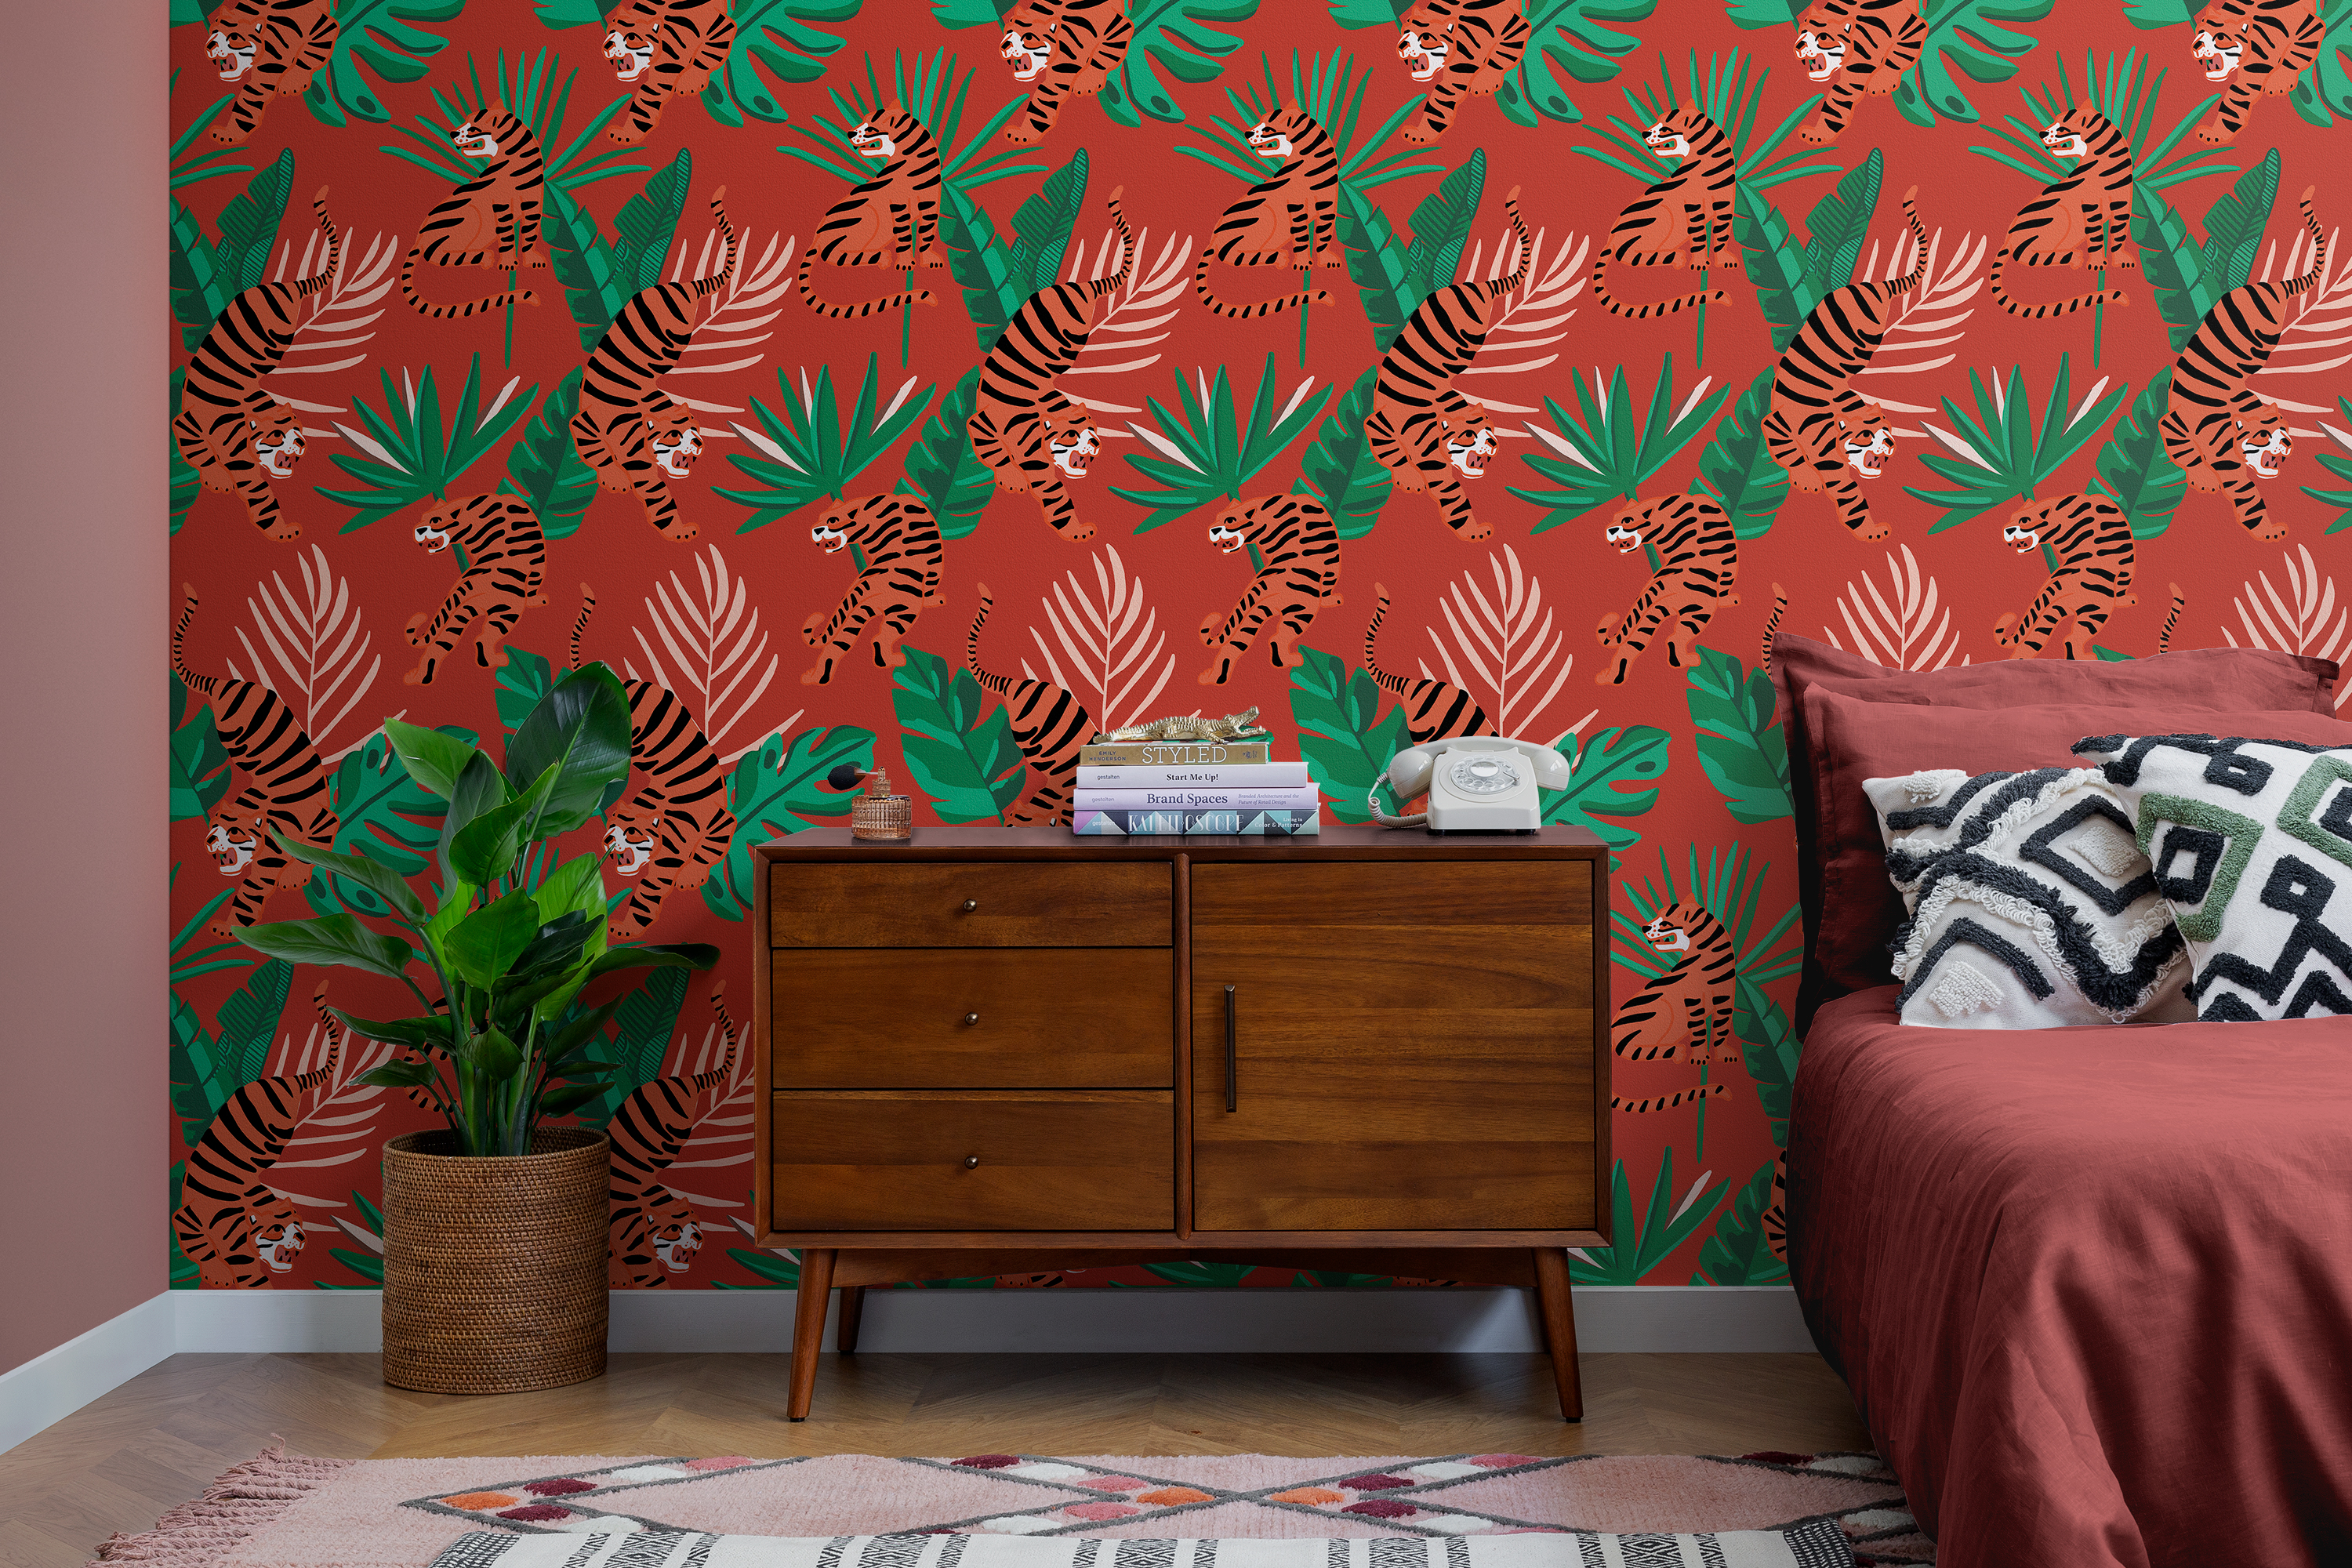 Wes anderson wallpaper aesthetic apartment therapy